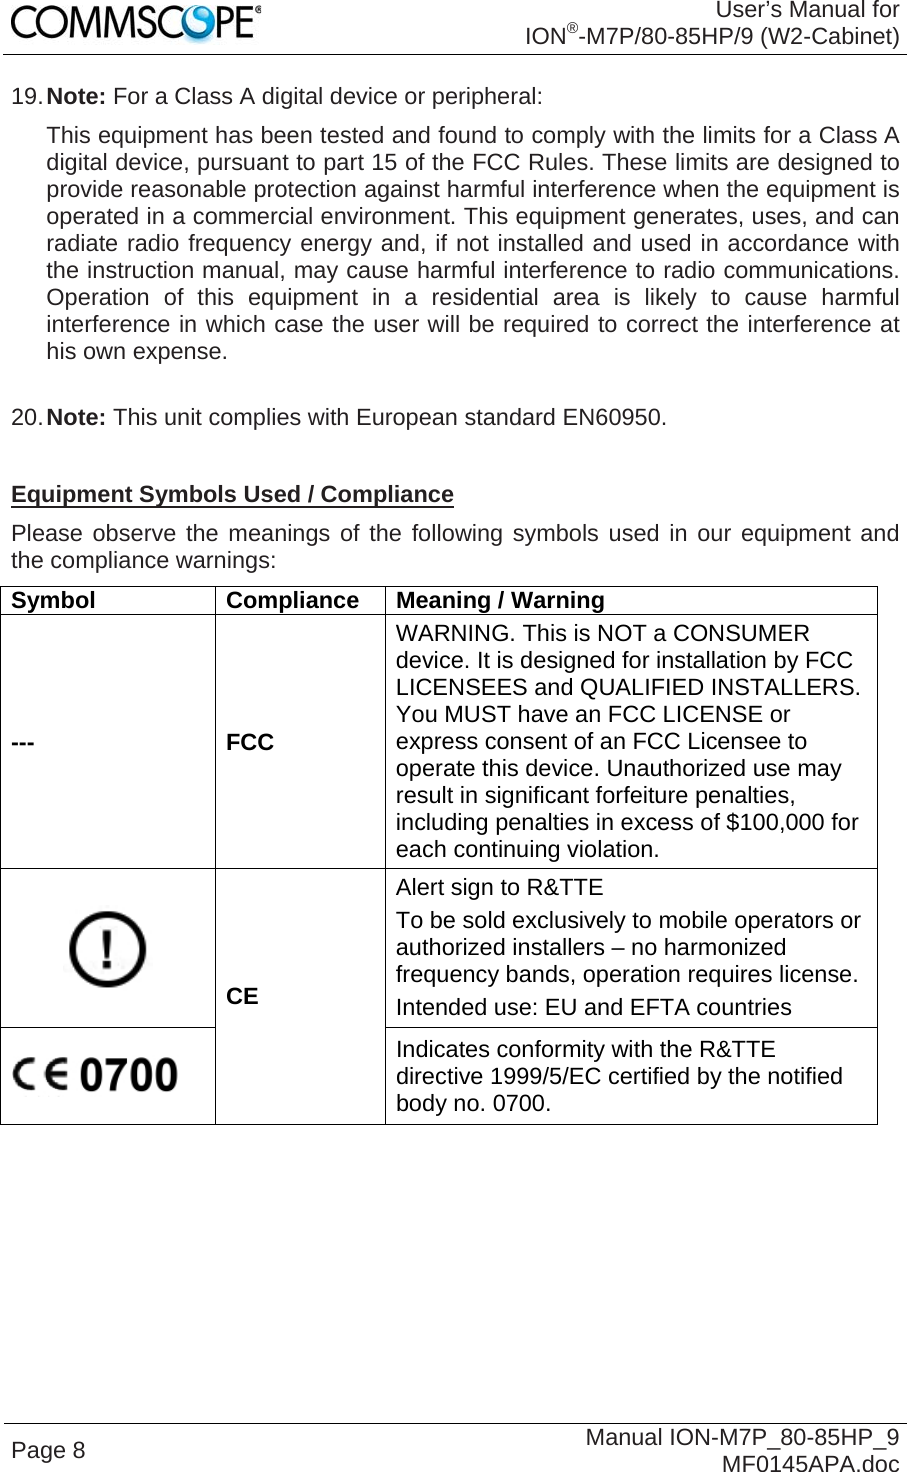 User’s Manual for ION®-M7P/80-85HP/9 (W2-Cabinet) Page 8  Manual ION-M7P_80-85HP_9 MF0145APA.doc 19. Note: For a Class A digital device or peripheral: This equipment has been tested and found to comply with the limits for a Class A digital device, pursuant to part 15 of the FCC Rules. These limits are designed to provide reasonable protection against harmful interference when the equipment is operated in a commercial environment. This equipment generates, uses, and can radiate radio frequency energy and, if not installed and used in accordance with the instruction manual, may cause harmful interference to radio communications. Operation of this equipment in a residential area is likely to cause harmful interference in which case the user will be required to correct the interference at his own expense.  20. Note: This unit complies with European standard EN60950.  Equipment Symbols Used / Compliance Please observe the meanings of the following symbols used in our equipment and the compliance warnings: Symbol Compliance Meaning / Warning --- FCC WARNING. This is NOT a CONSUMER device. It is designed for installation by FCC LICENSEES and QUALIFIED INSTALLERS. You MUST have an FCC LICENSE or express consent of an FCC Licensee to operate this device. Unauthorized use may result in significant forfeiture penalties, including penalties in excess of $100,000 for each continuing violation.  CE Alert sign to R&amp;TTE To be sold exclusively to mobile operators or authorized installers – no harmonized frequency bands, operation requires license. Intended use: EU and EFTA countries  Indicates conformity with the R&amp;TTE directive 1999/5/EC certified by the notified body no. 0700.    